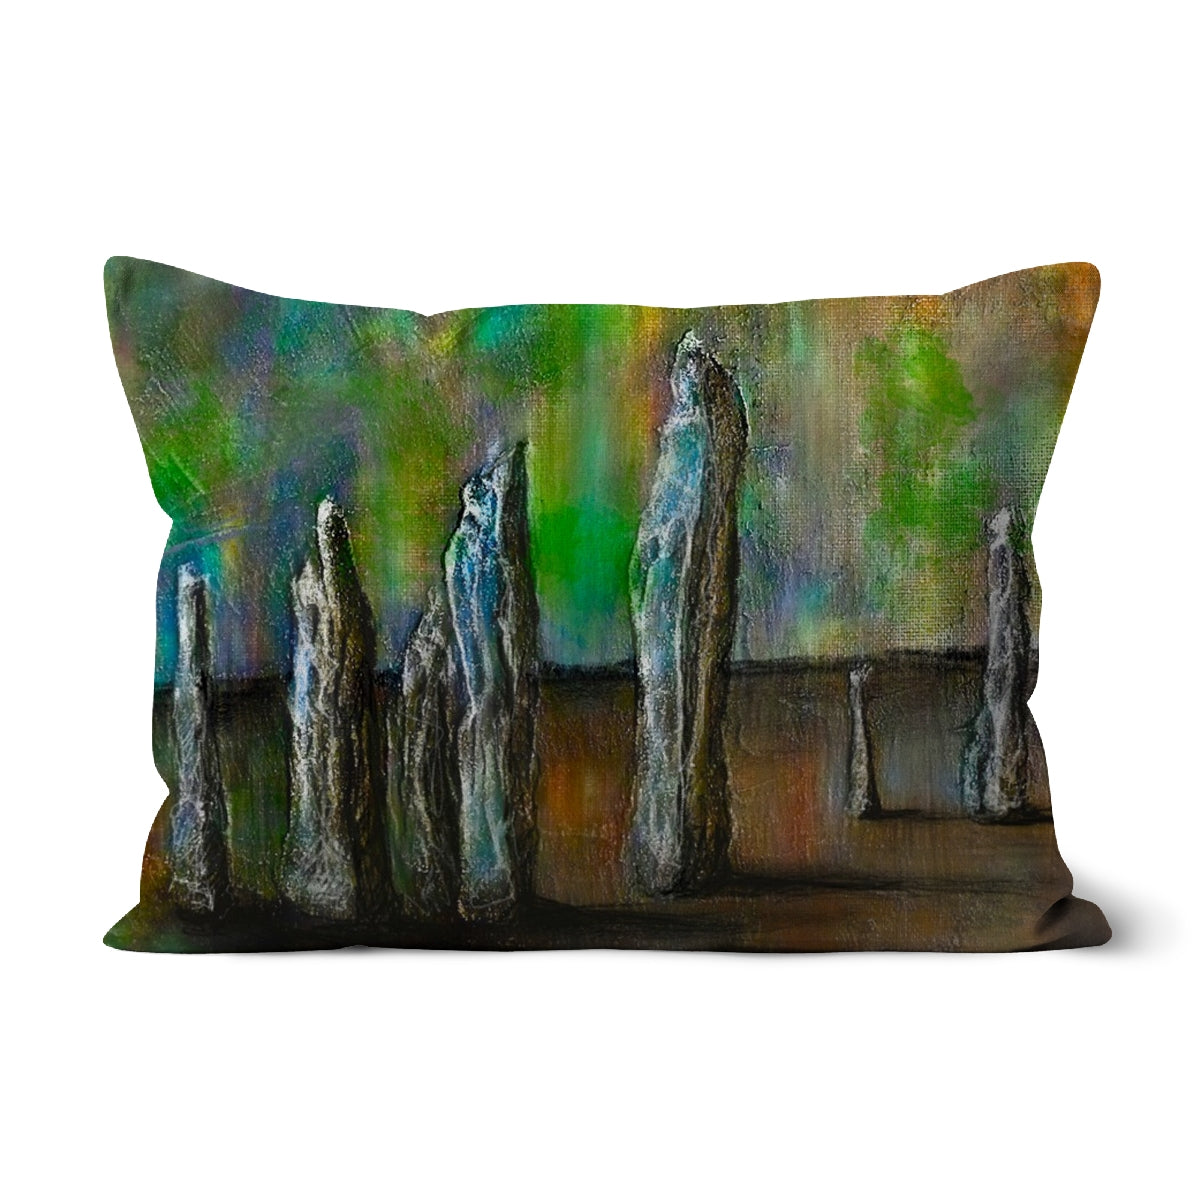 Callanish Northern Lights Art Gifts Cushion-Cushions-Hebridean Islands Art Gallery-Linen-19"x13"-Paintings, Prints, Homeware, Art Gifts From Scotland By Scottish Artist Kevin Hunter